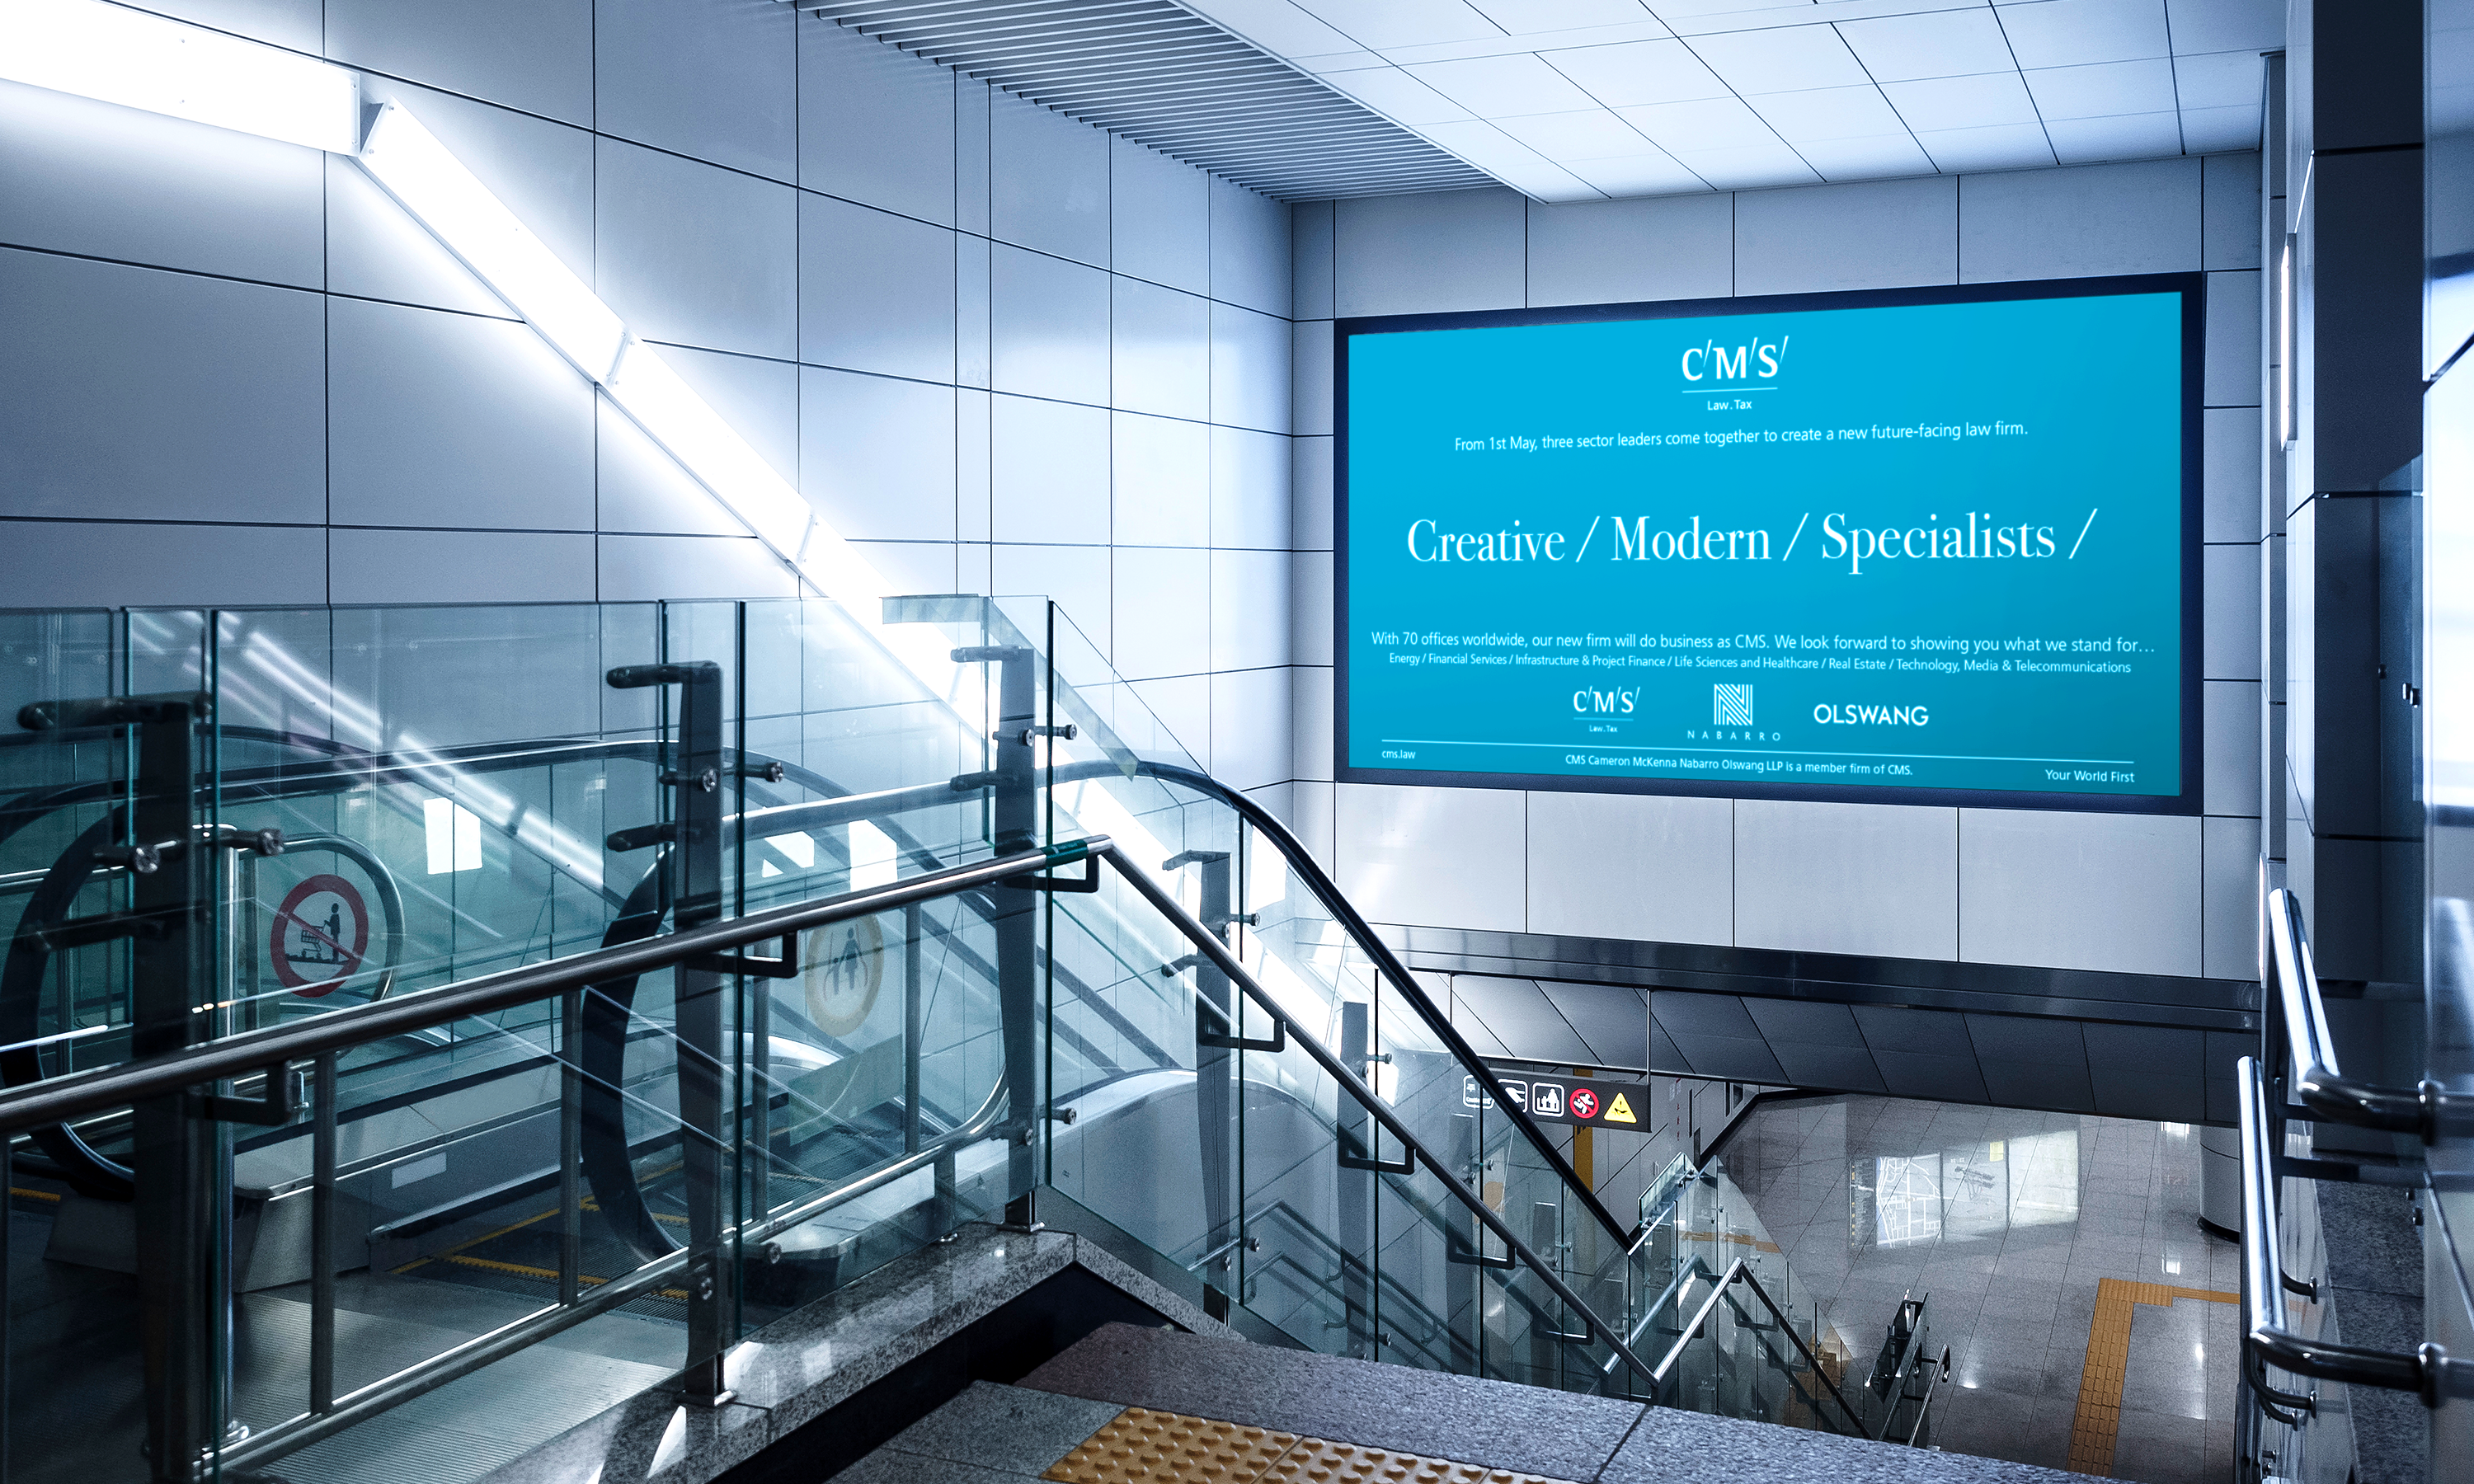 Branding and advertising by Neon - CMS London Law Firm - Law sector branding - Creative Modern Specialist London City Airport advertising designed by Dana Robertson